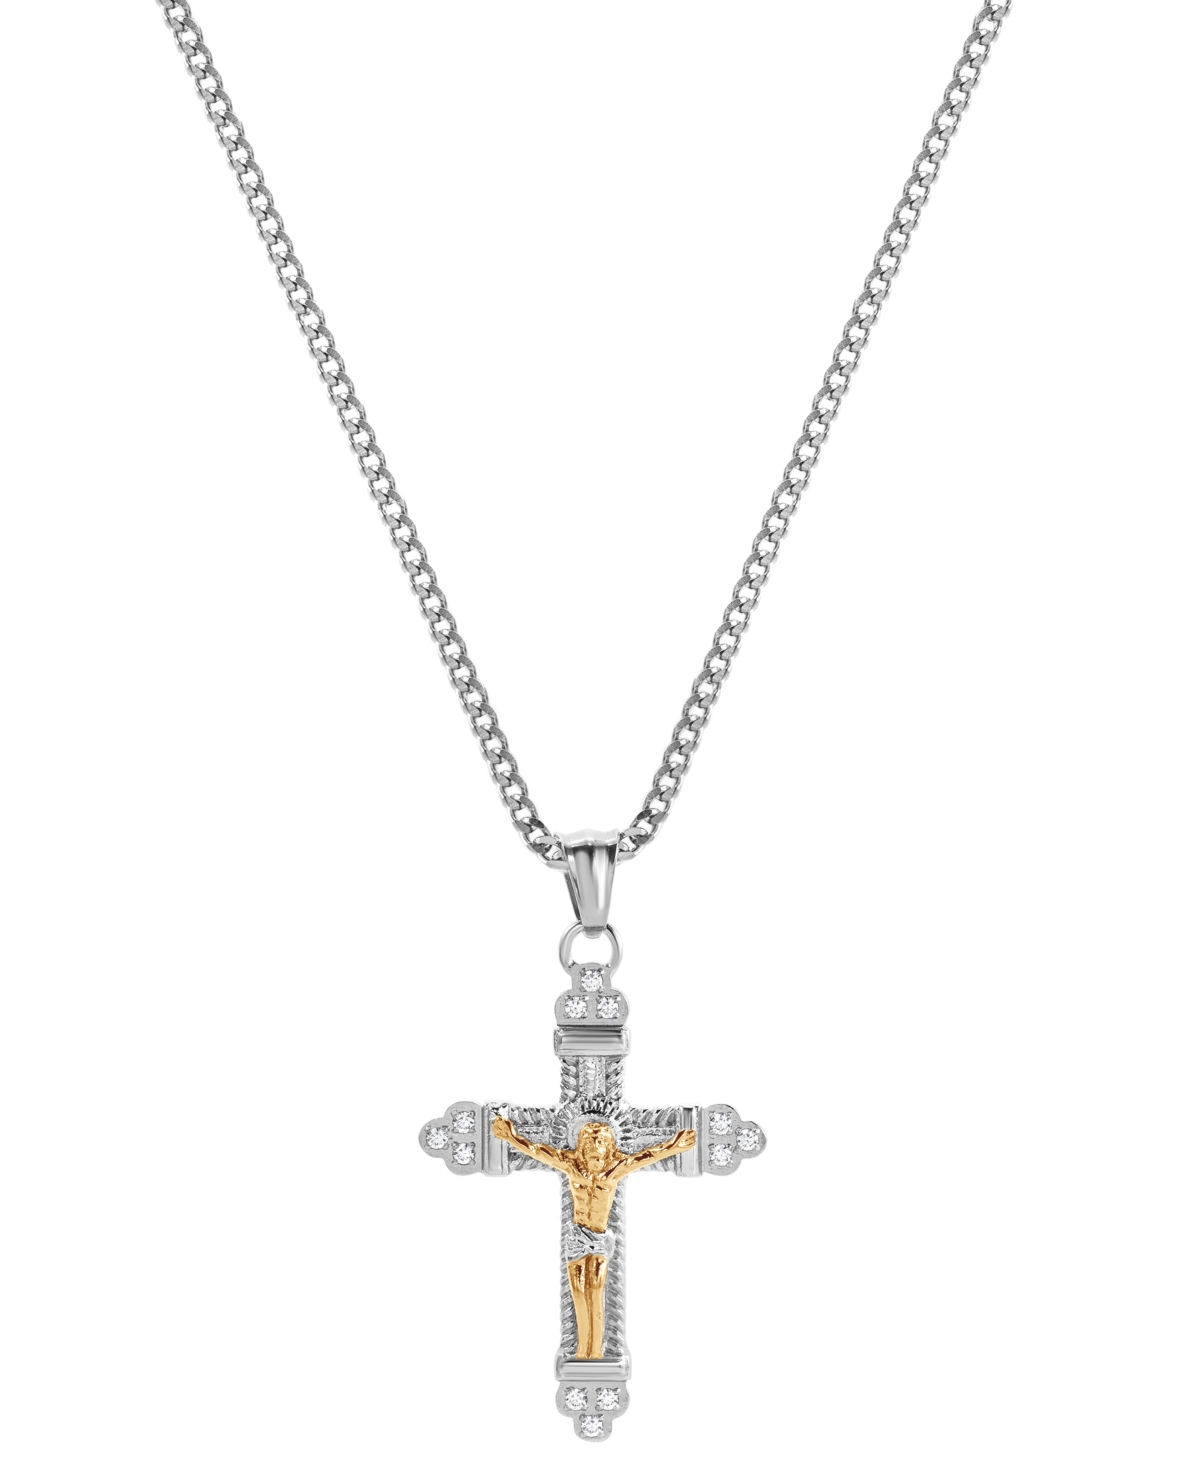 Men's Cubic Zirconia Two-Tone Crucifix Cross 24" Pendant Necklace in Stainless Steel & Gold-Tone Ion-Plate - Steel